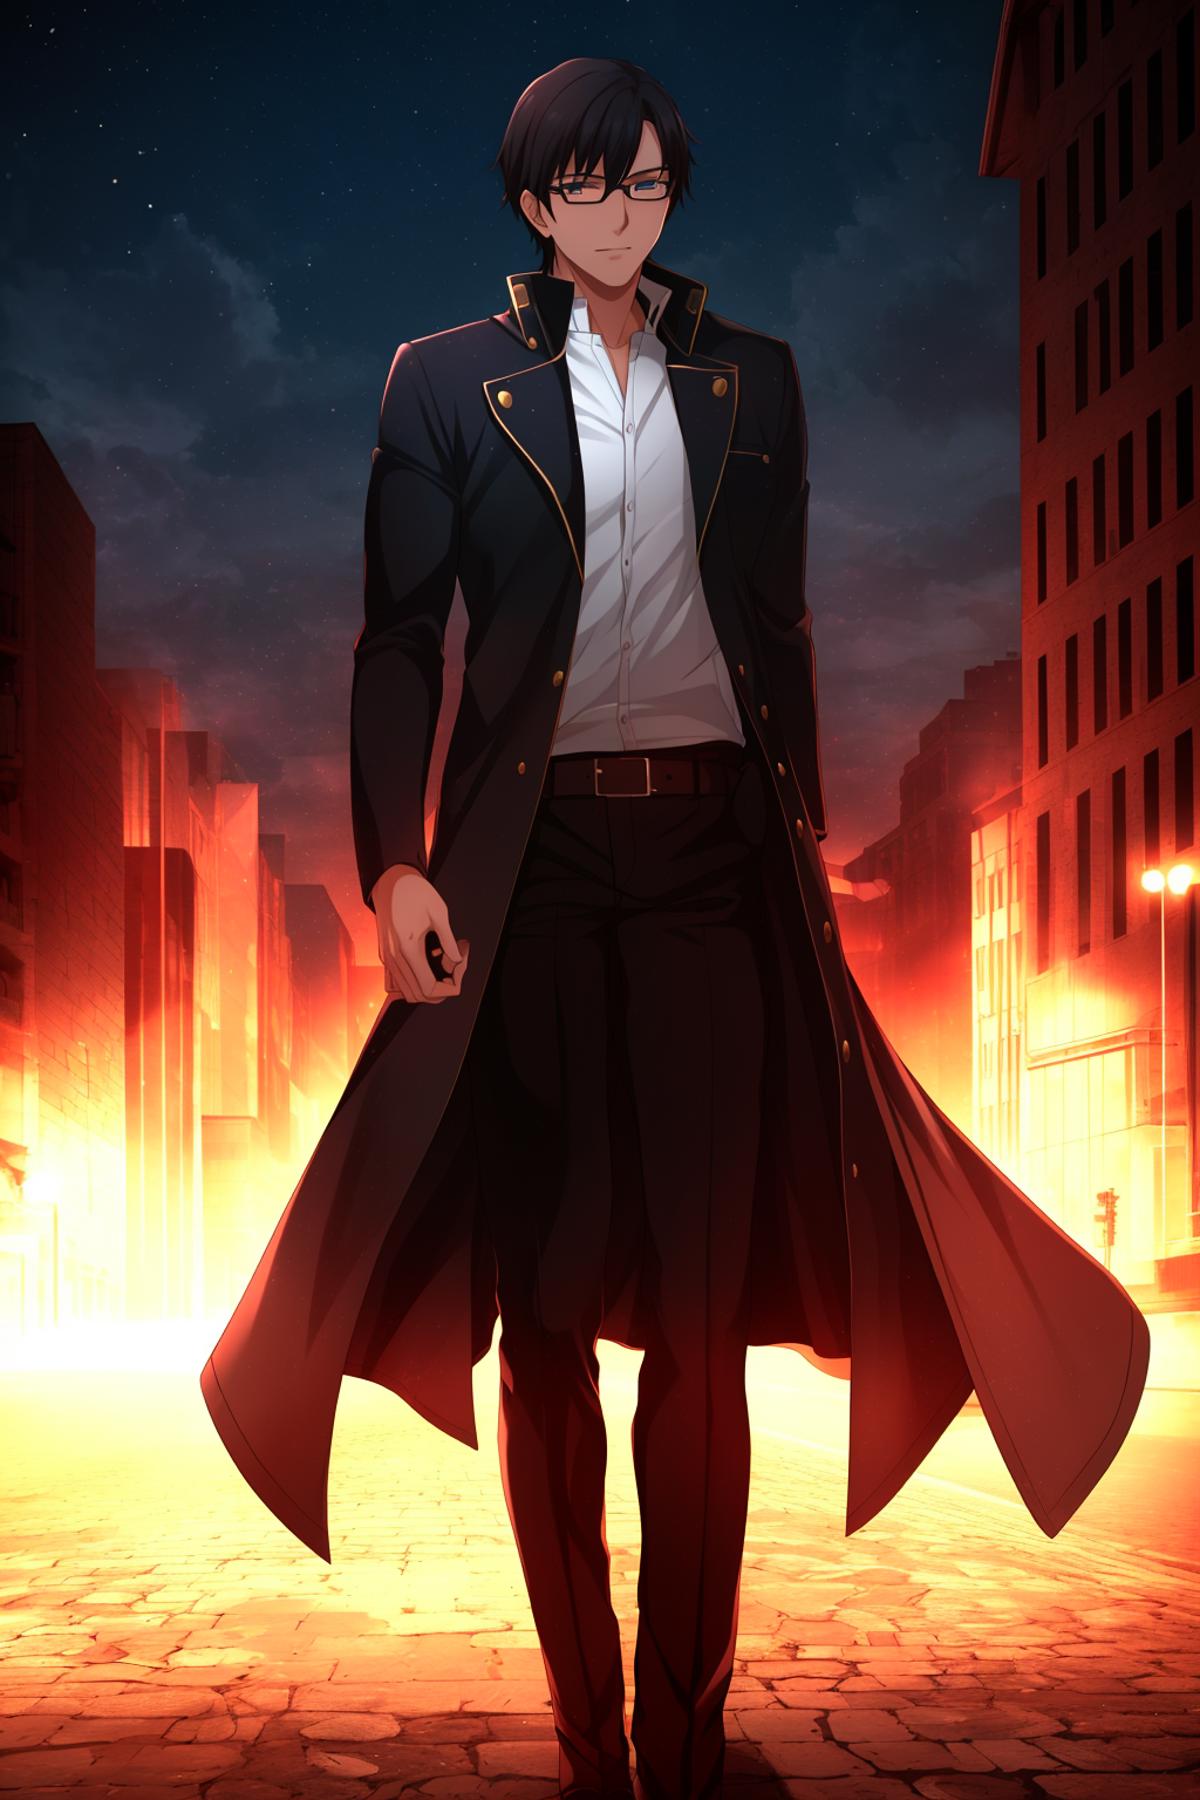 IronCatLoRA #4 - Fate/stay night: UBW Style image by MadlyLaughing